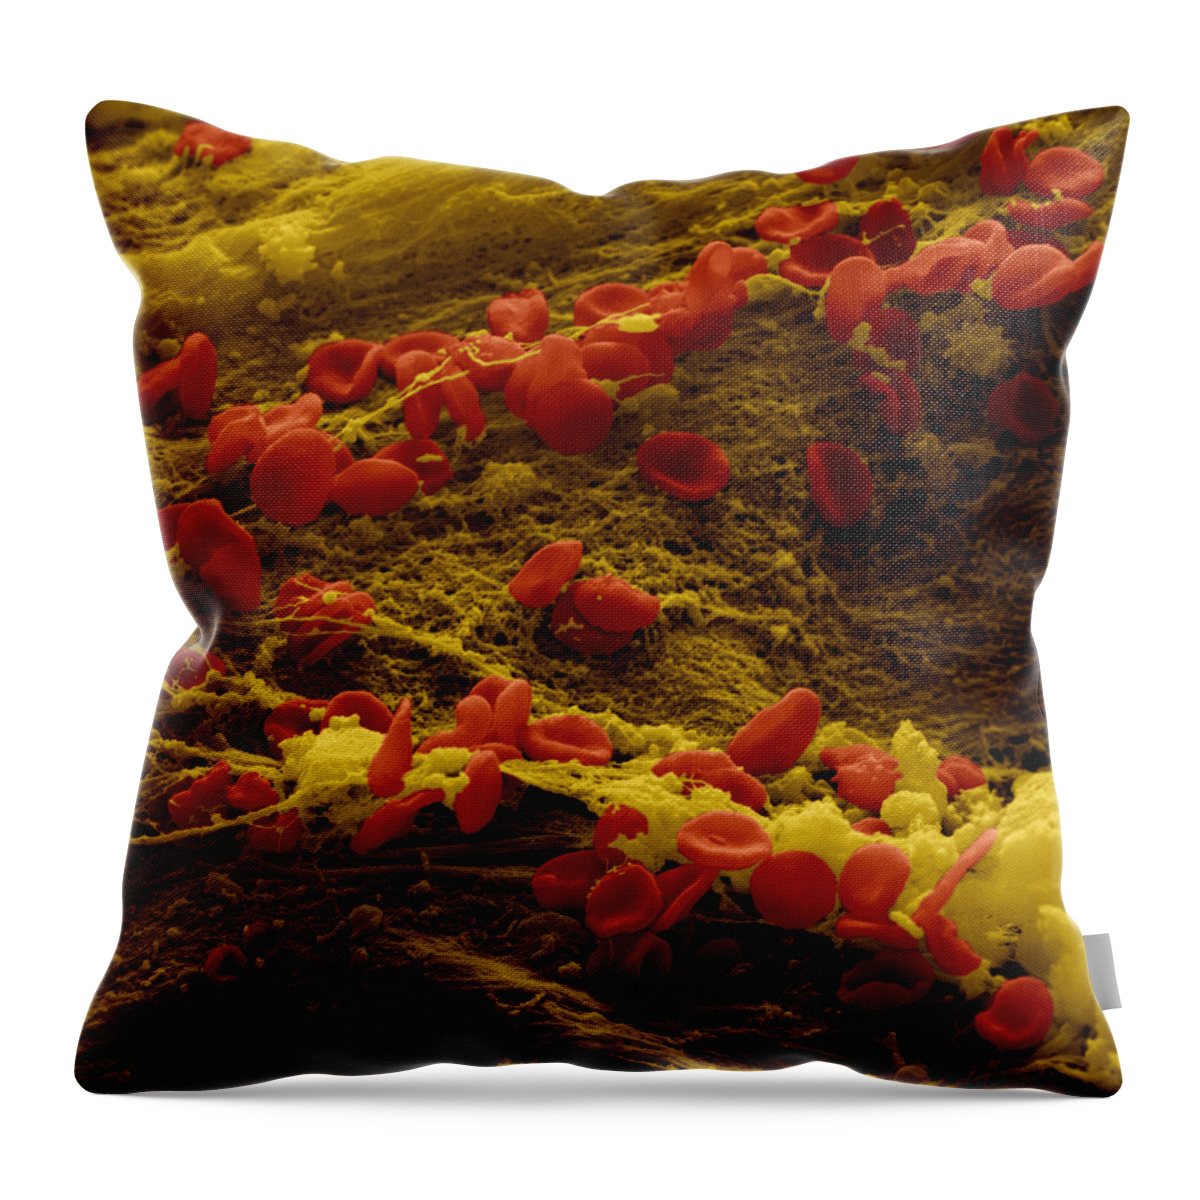 Blood Throw Pillow featuring the photograph Erythrocytes And Fibrin Threads #3 by Meckes/ottawa